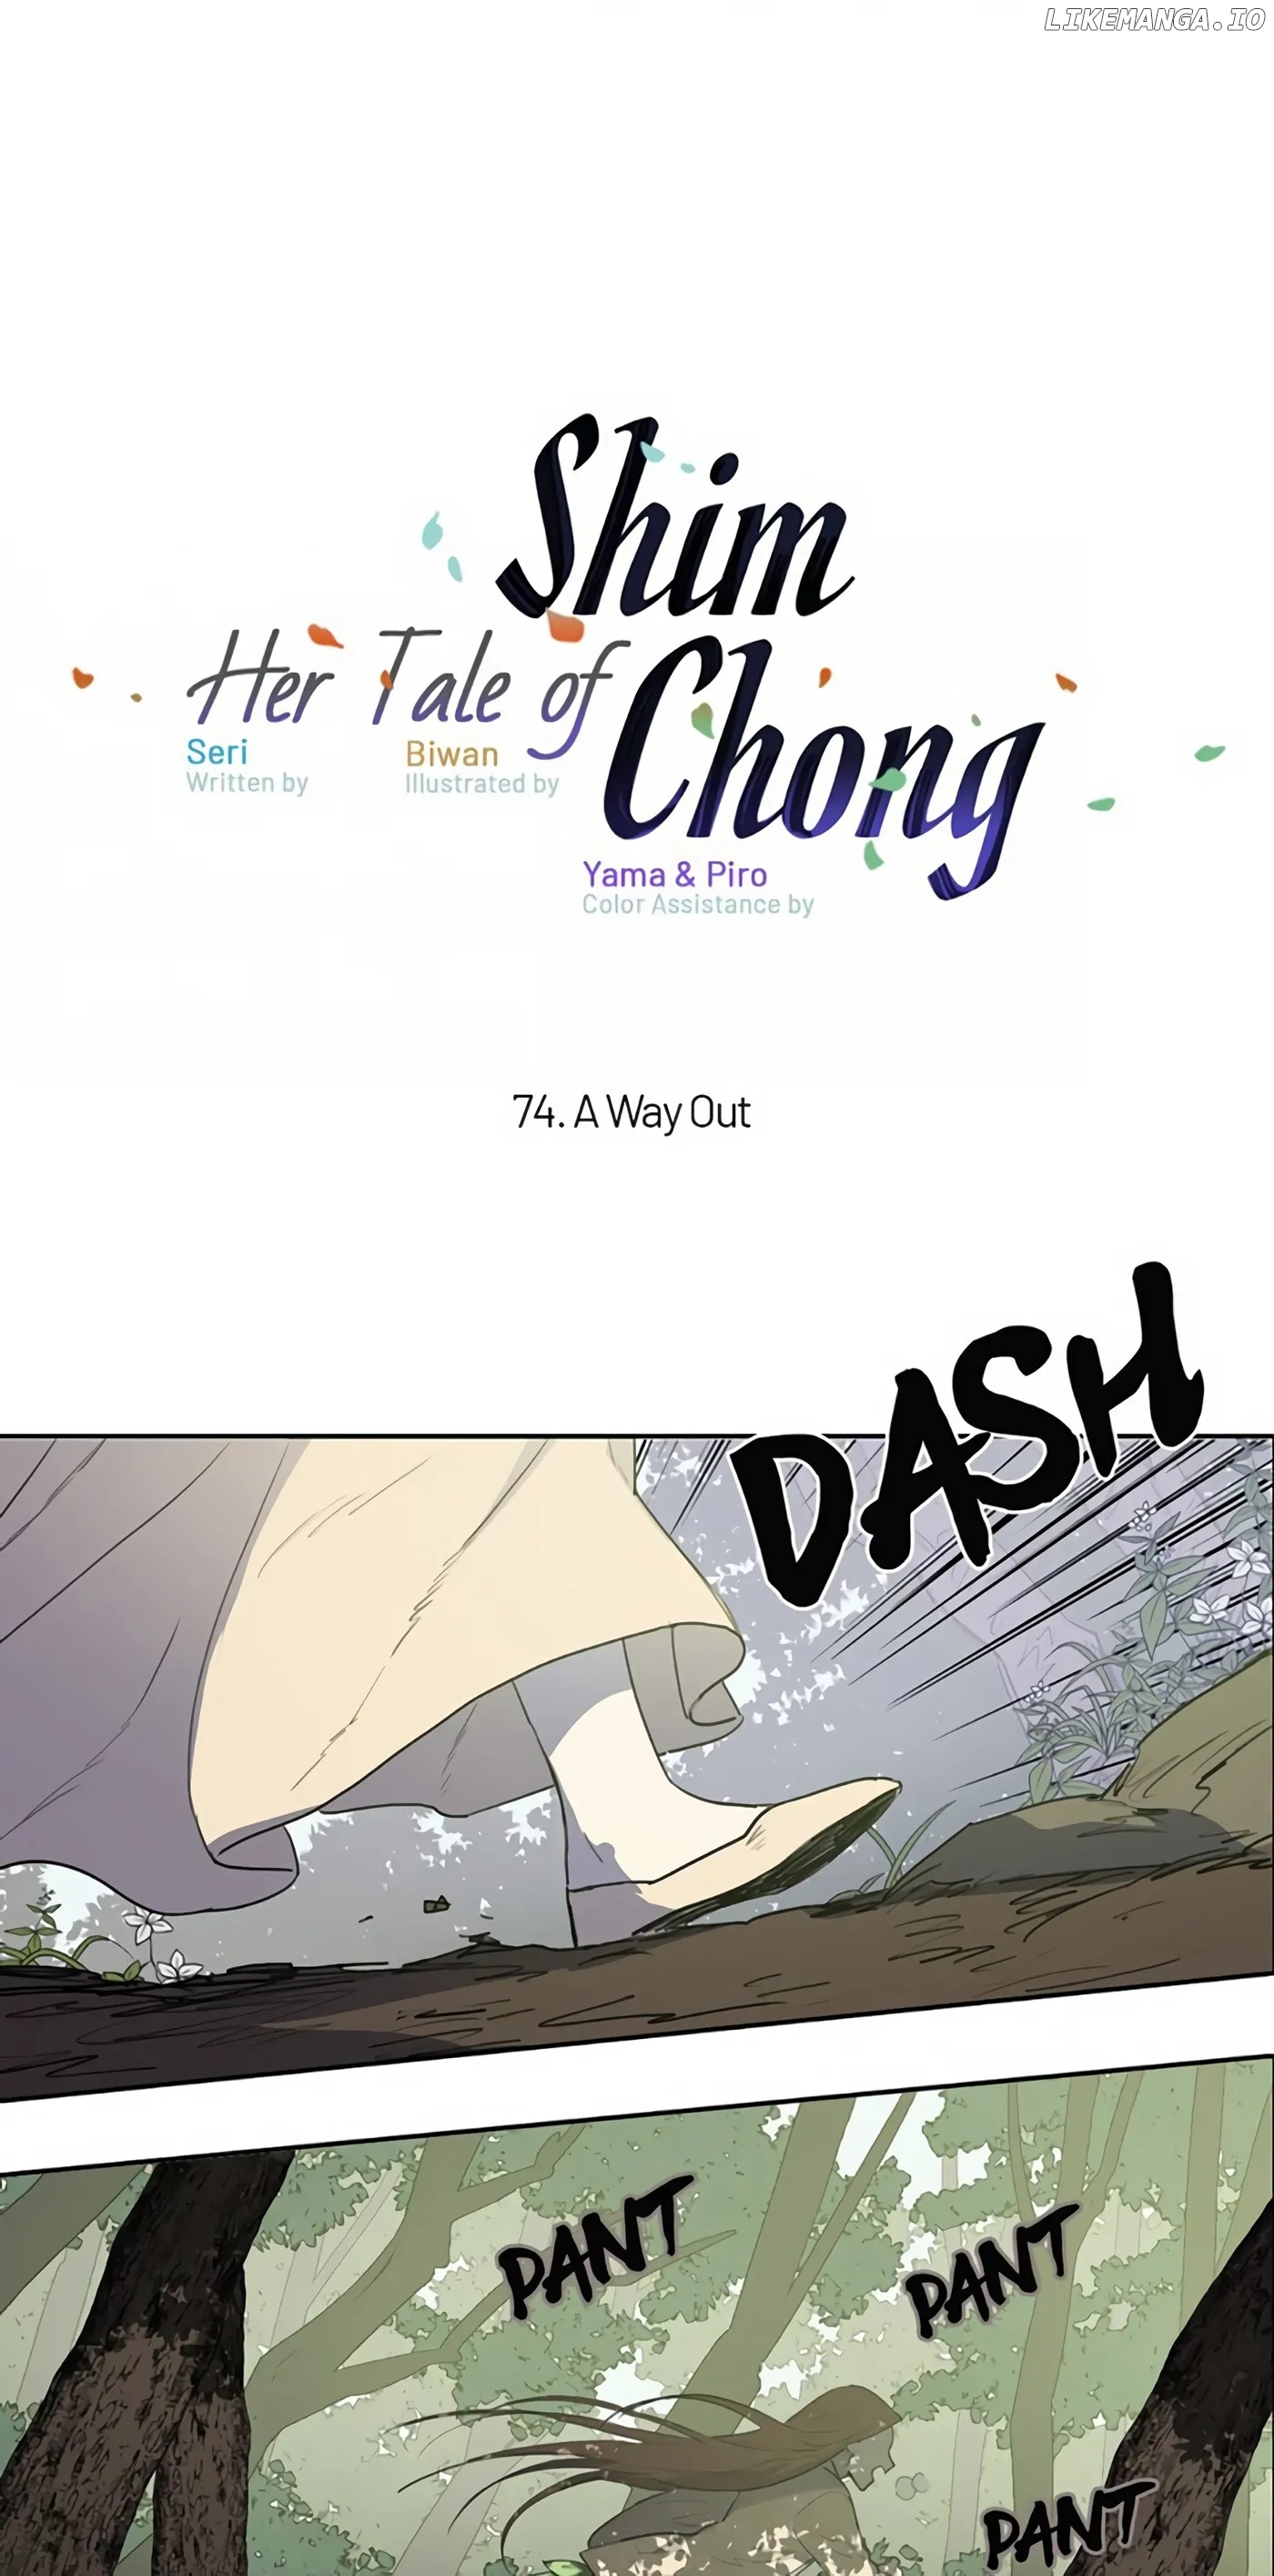 Her Tale of Shim Chong - chapter 74 - #1